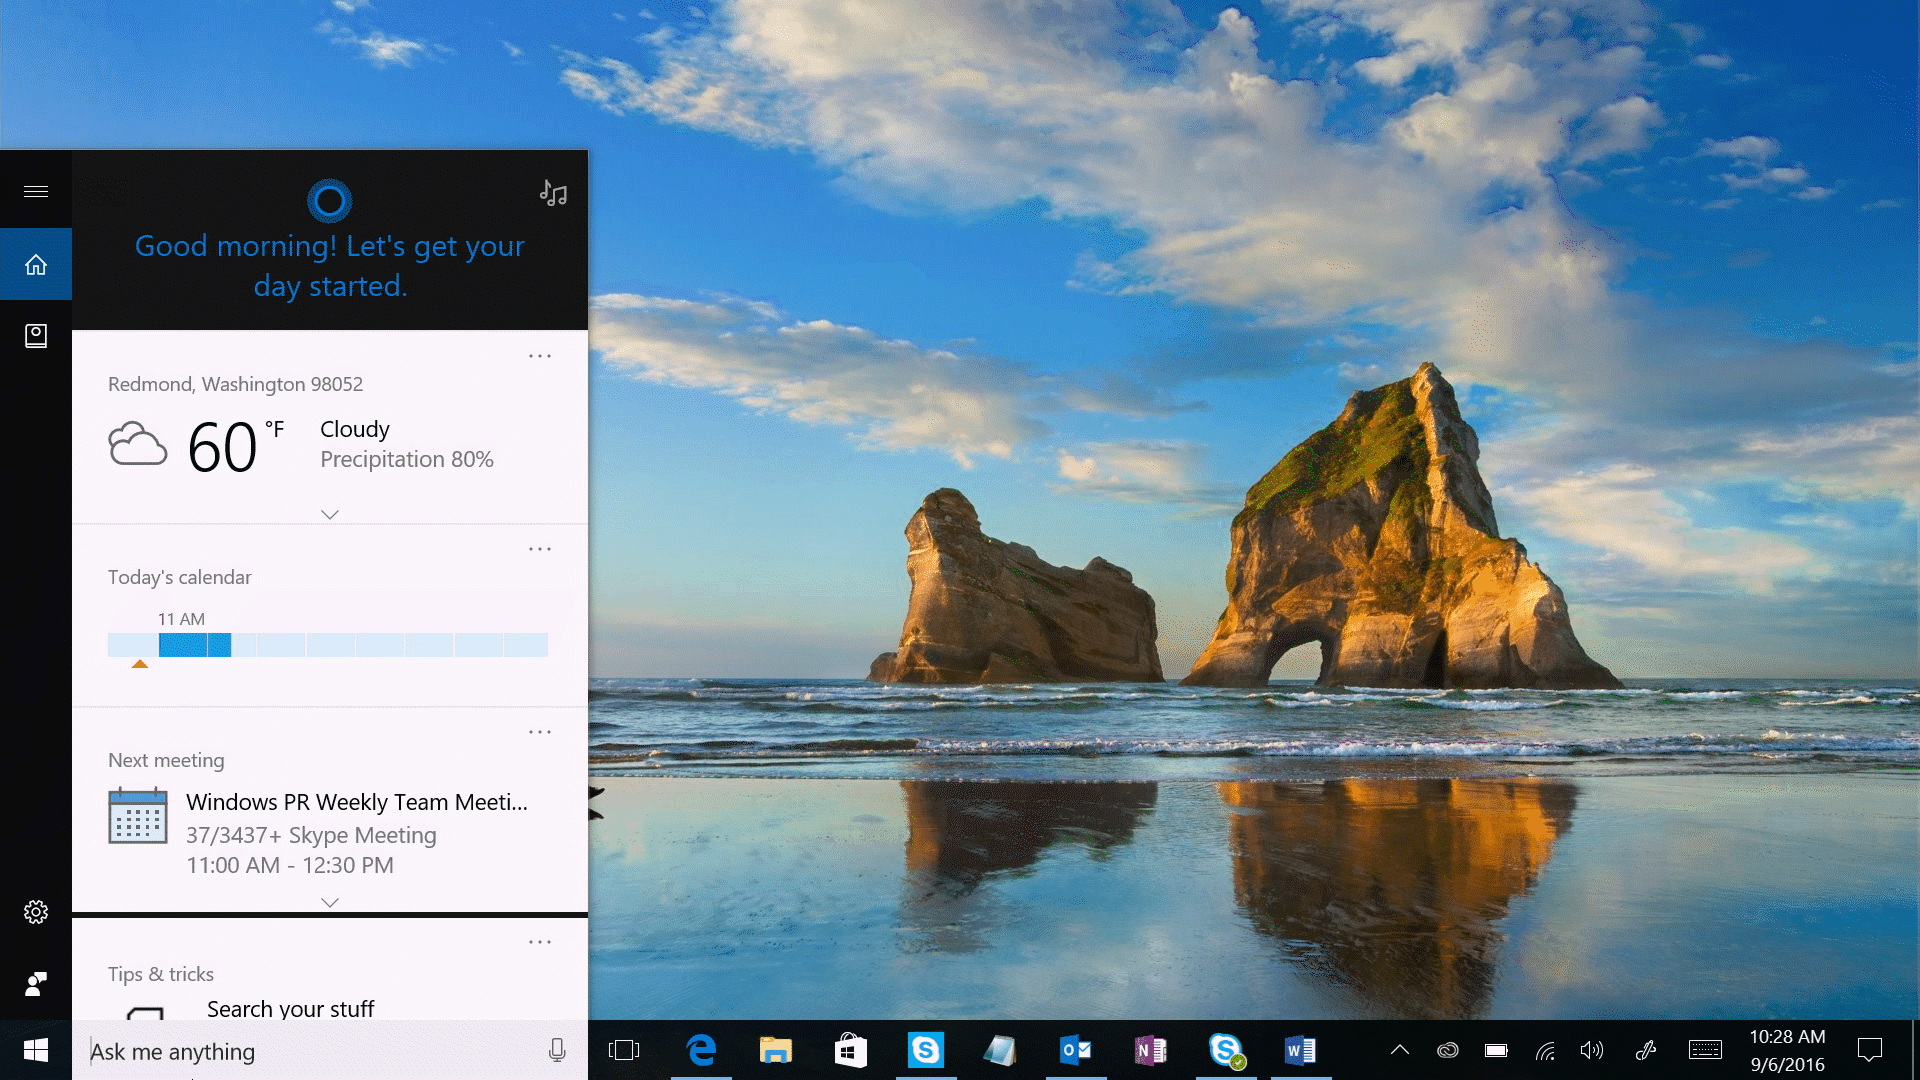 Search your PC and web from the taskbar